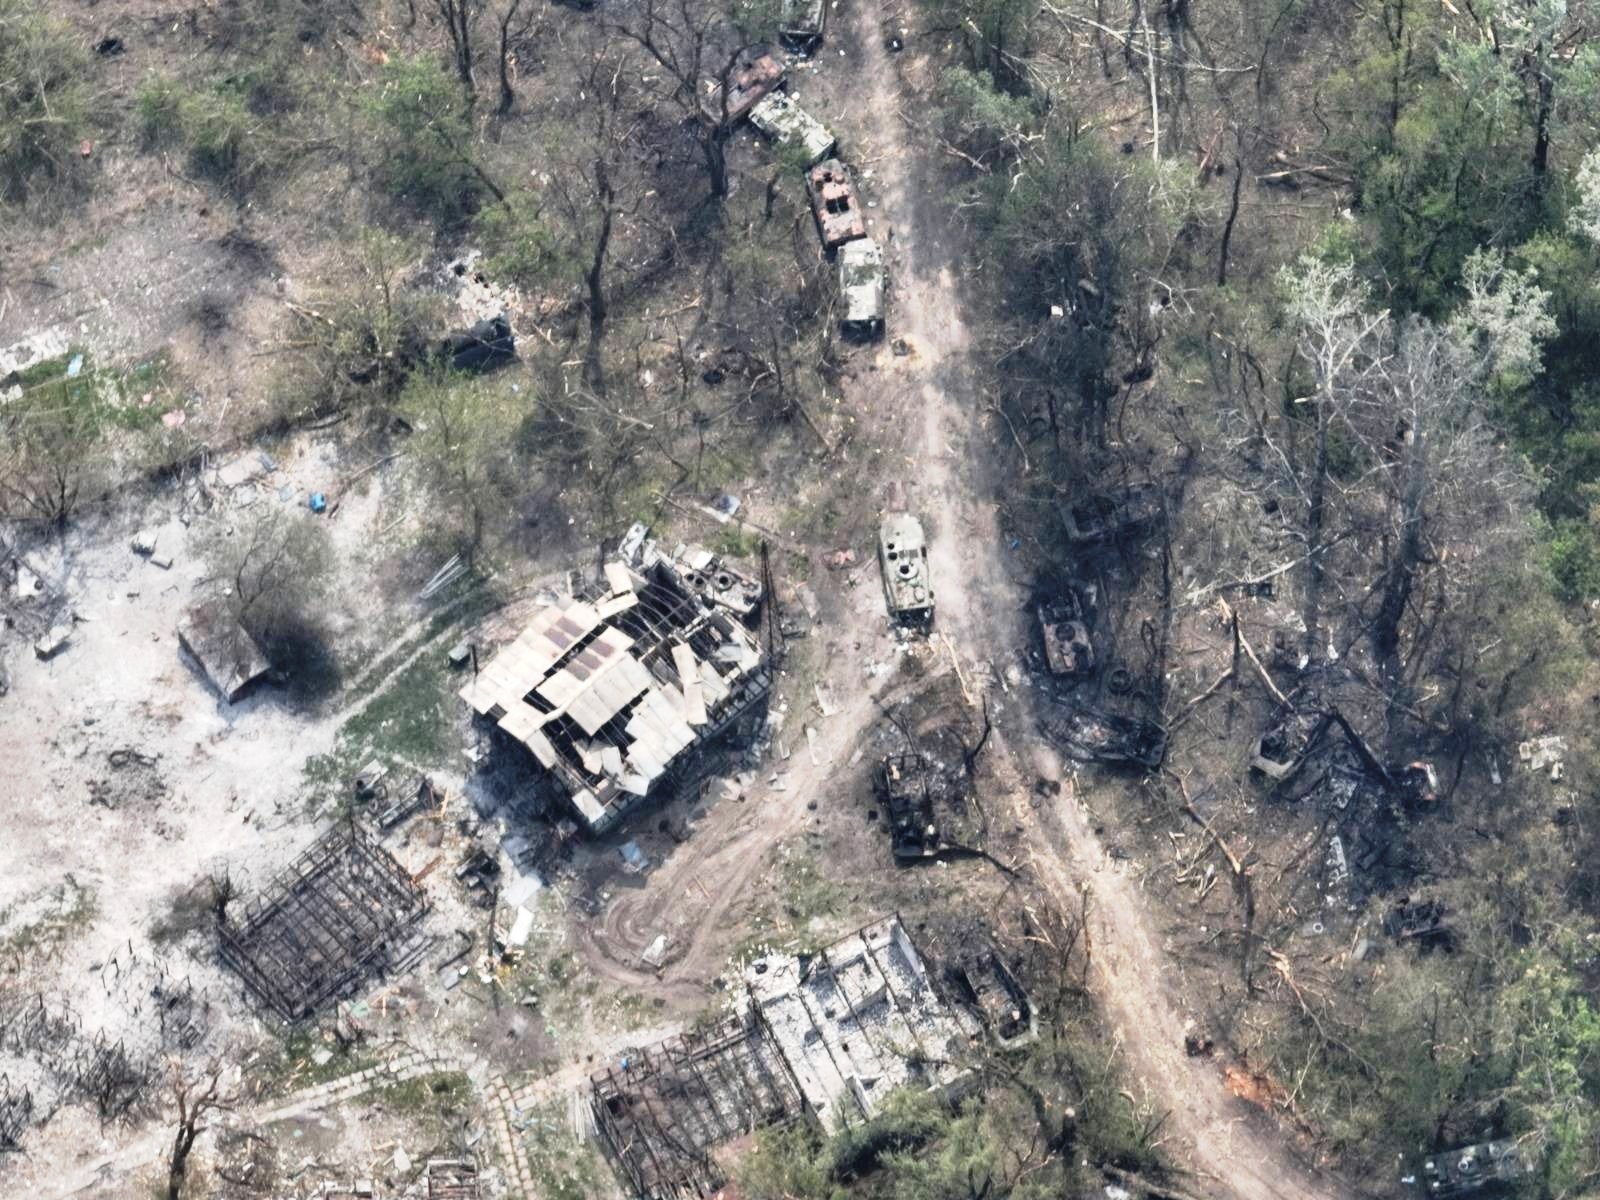 An aerial view of destroyed buildings and burnt vehicles on the banks of Siverskyi Donets River